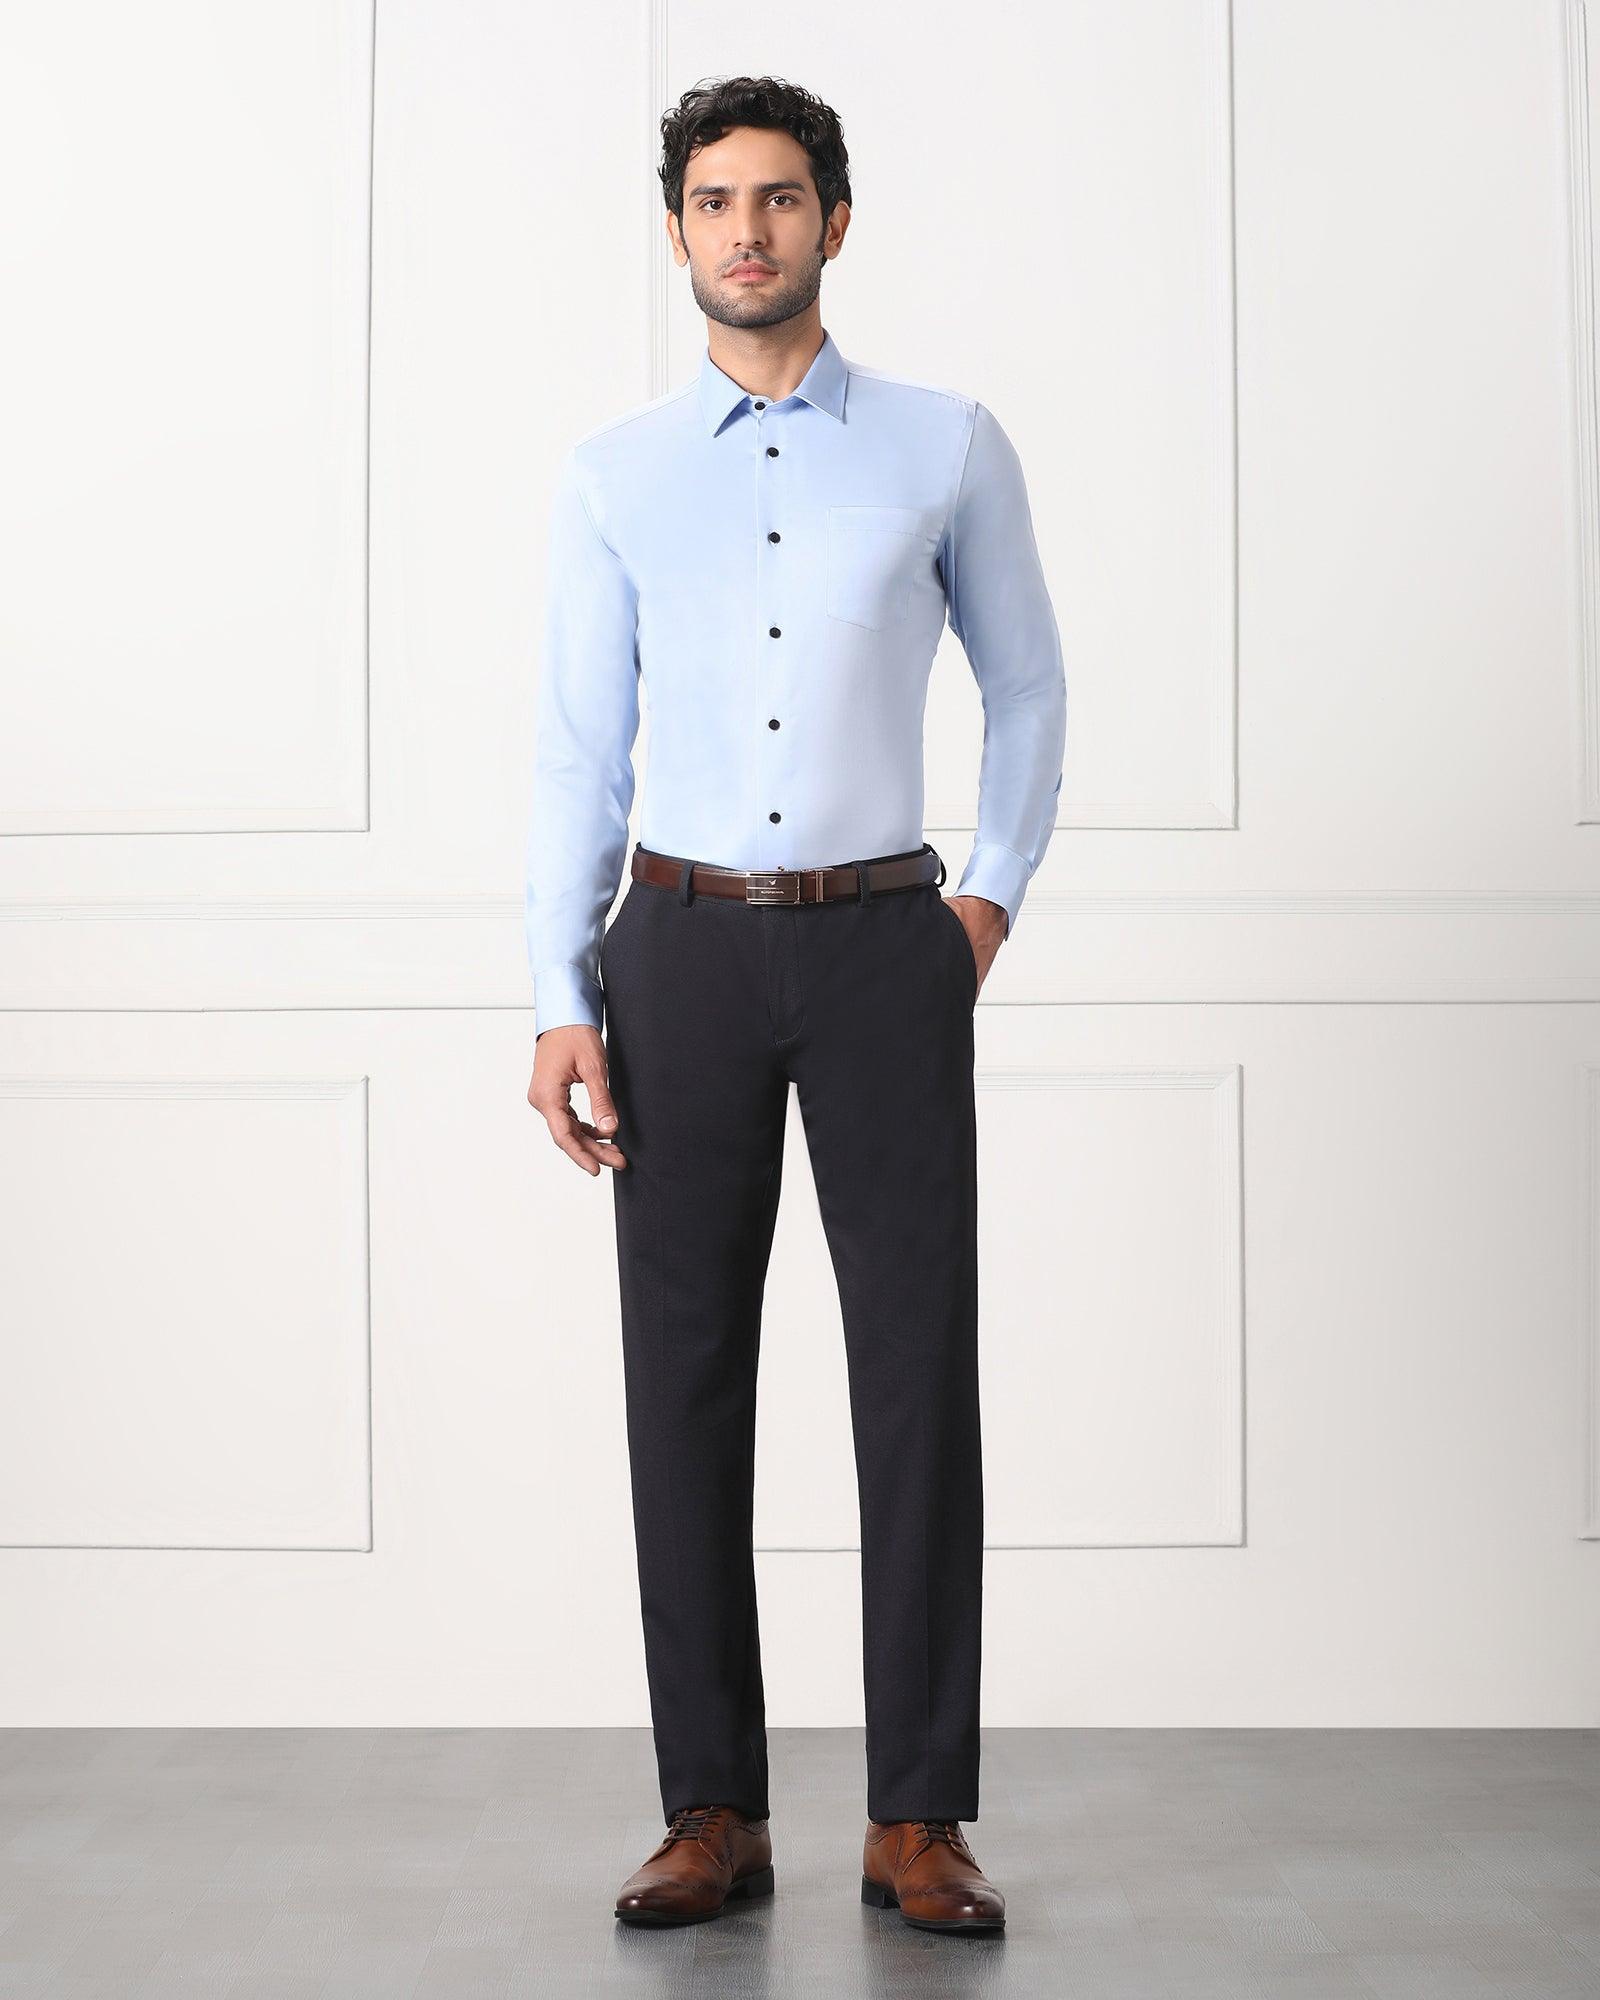 Buy Reiss Dunn Textured Slim Fit Trousers from the Laura Ashley online shop